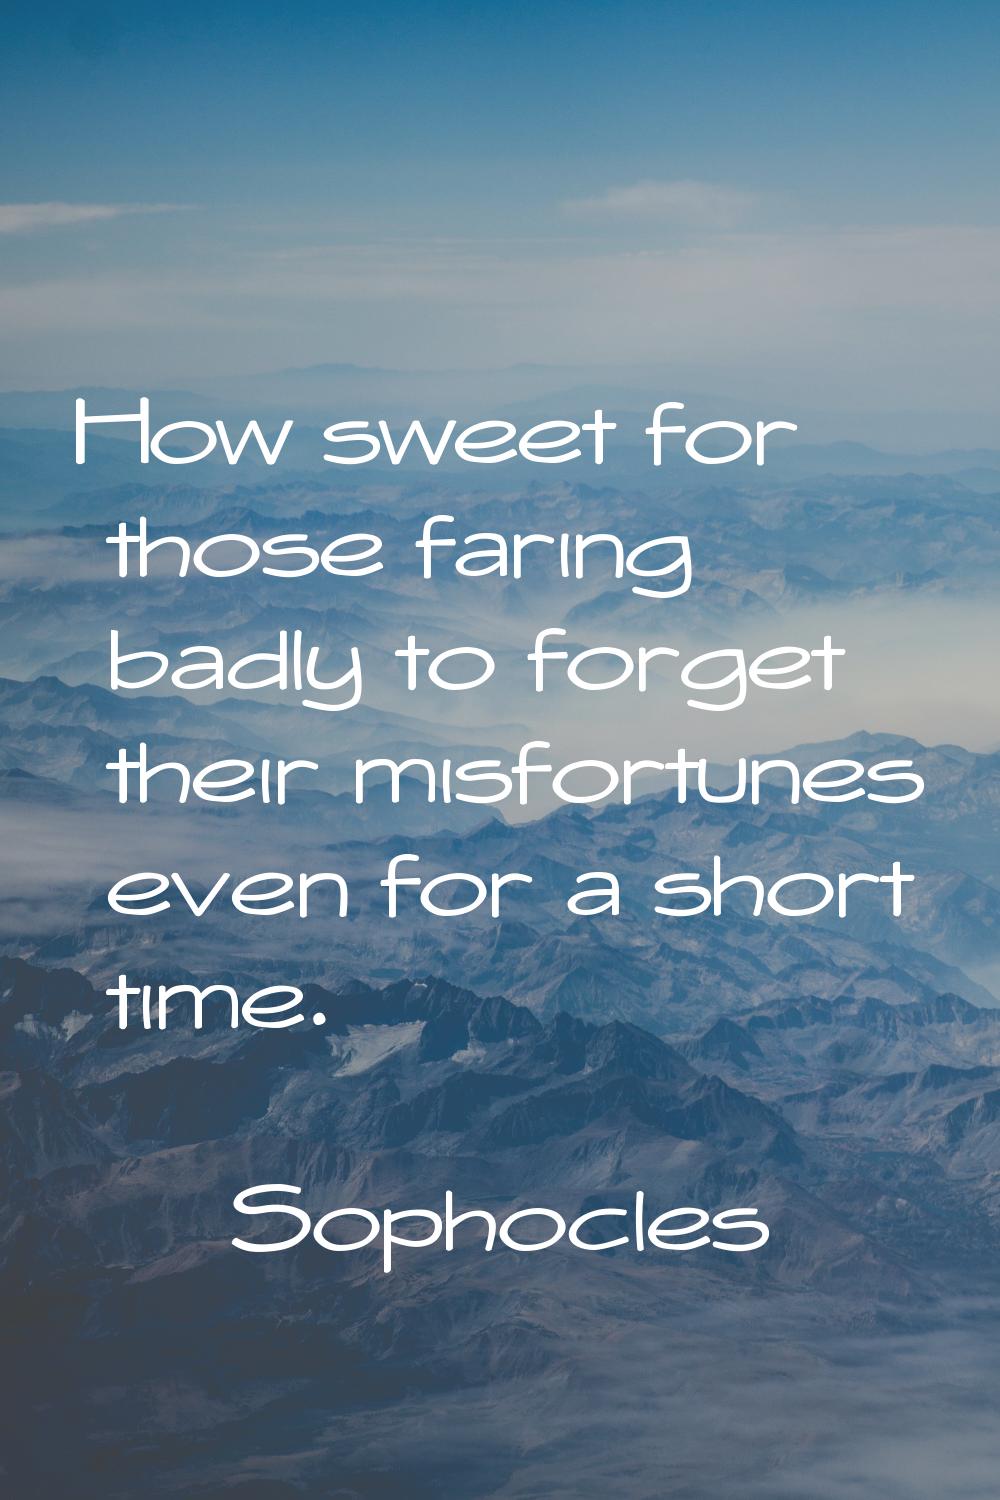 How sweet for those faring badly to forget their misfortunes even for a short time.